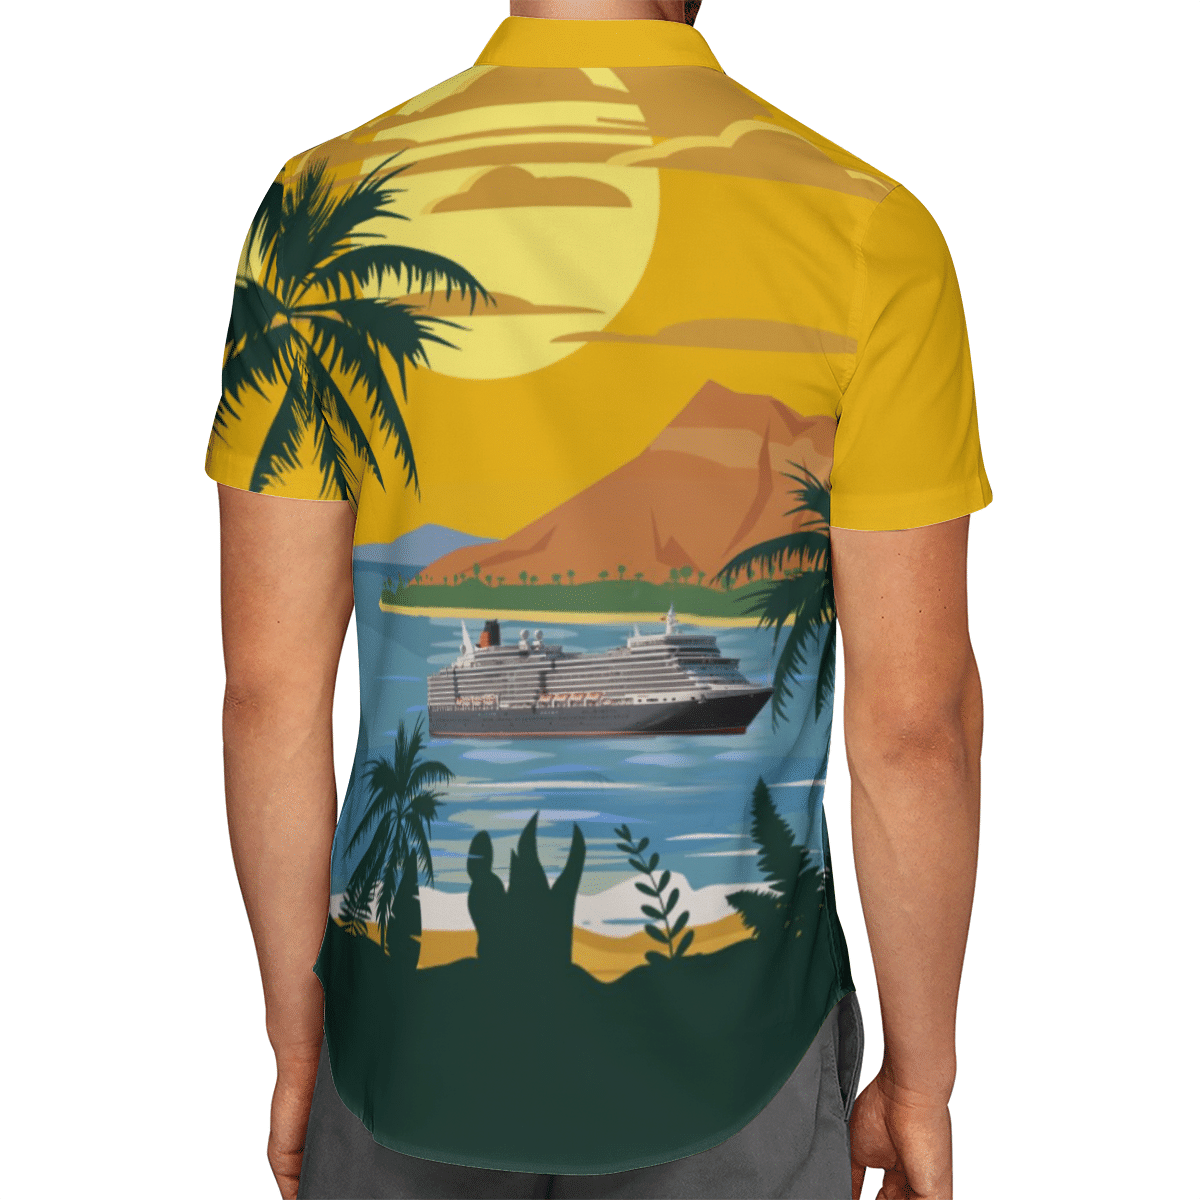 Going to the beach with a quality shirt 56